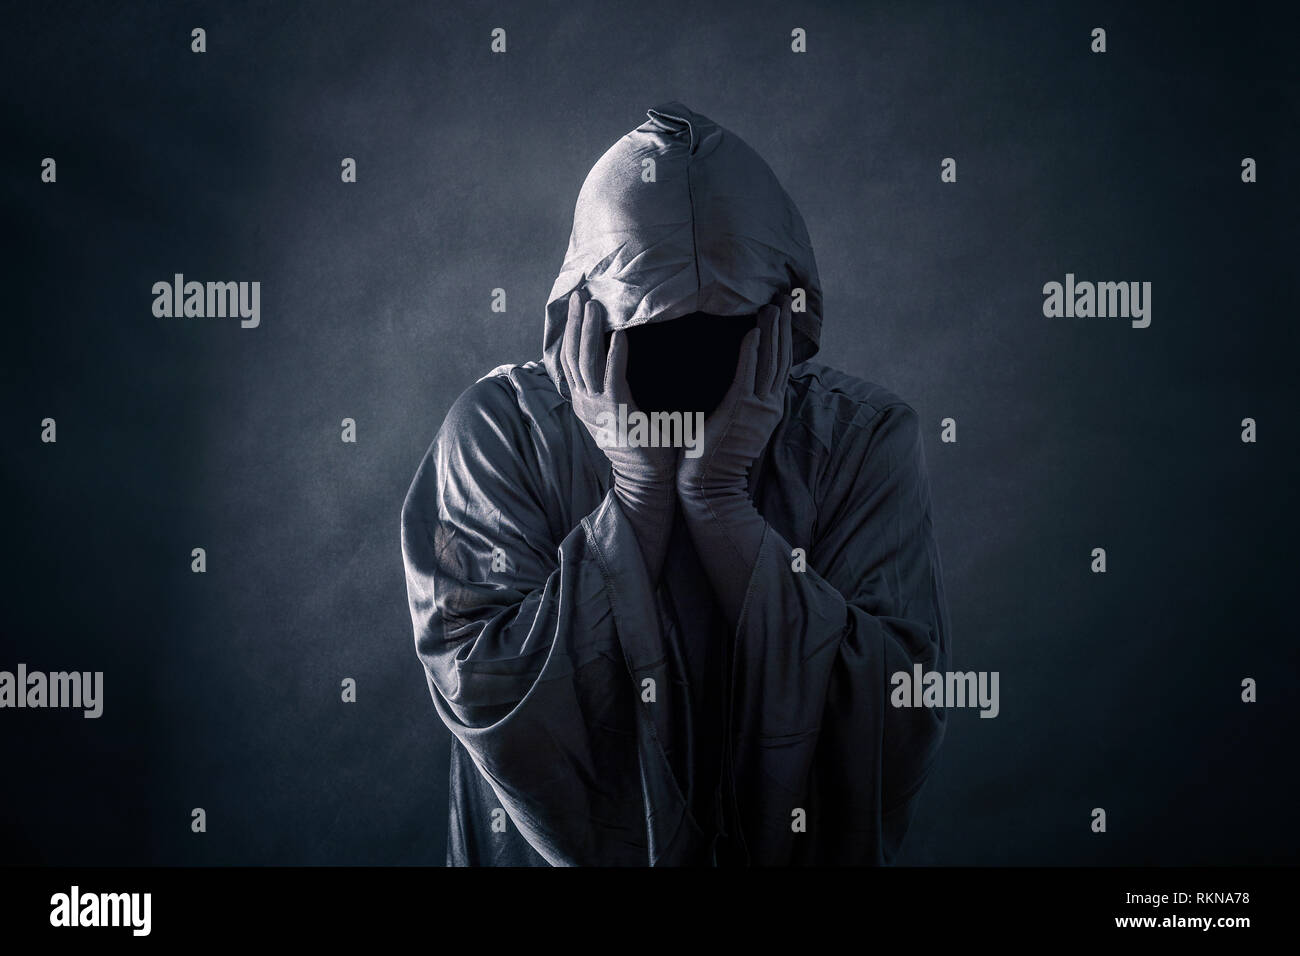 Scary figure in hooded cloak Stock Photo